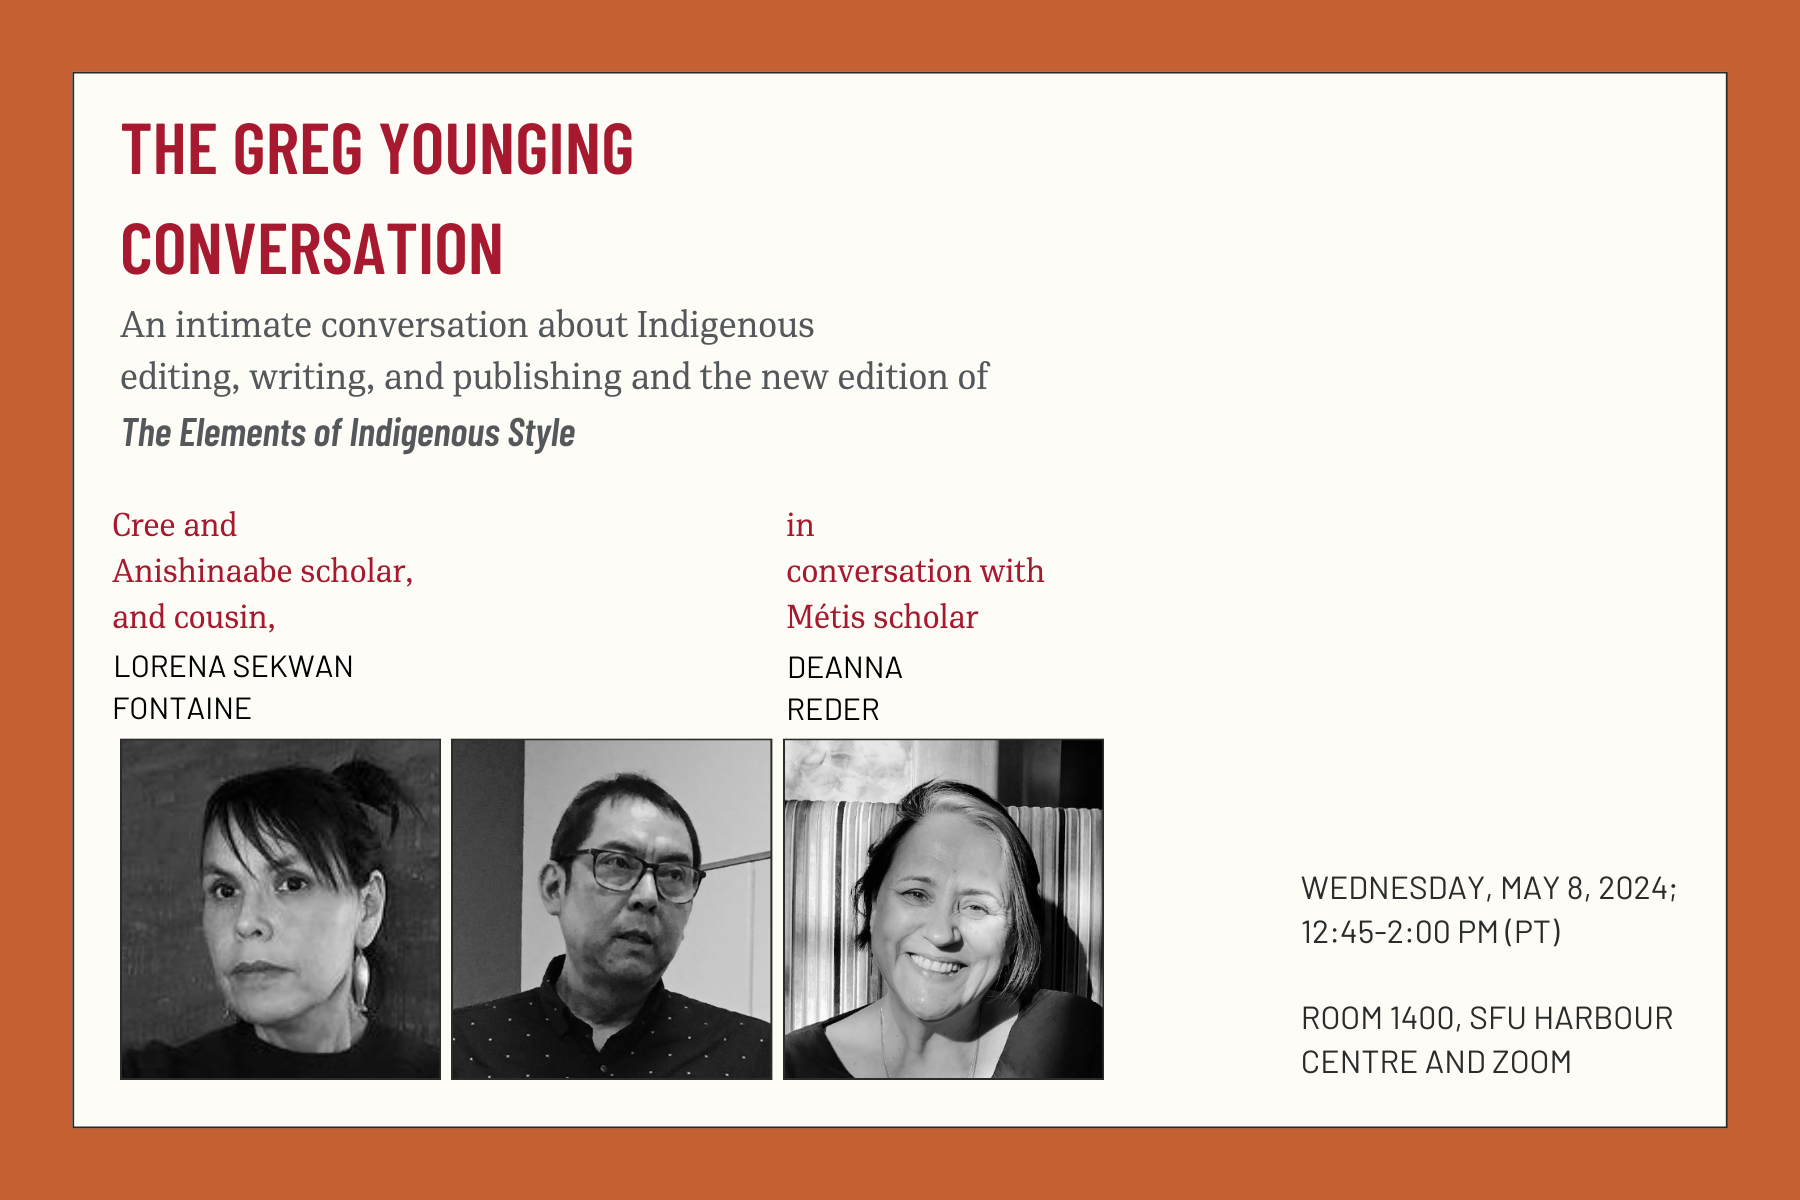 An announcement poster with the following text: The Greg Younging Conversation: An intimate conversation about Indigenous editing, writing, and publishing and the new edition of The Elements of Indigenous Style. Cree and Anishinaabe scholar, and cousin, Lorena Sekwan Fontaine in conversation with Métis scholar, Deanna Reder. Below the text are three black and white images (placed horizontally) of Lorena, Greg, and Deanna, respectively. On the right are two texts, in bold, which read: Wednesday, May 8, 2024, 12:45-2:00 PM (PT) and Room 1400, SFU Harbour Centre and Zoom.  